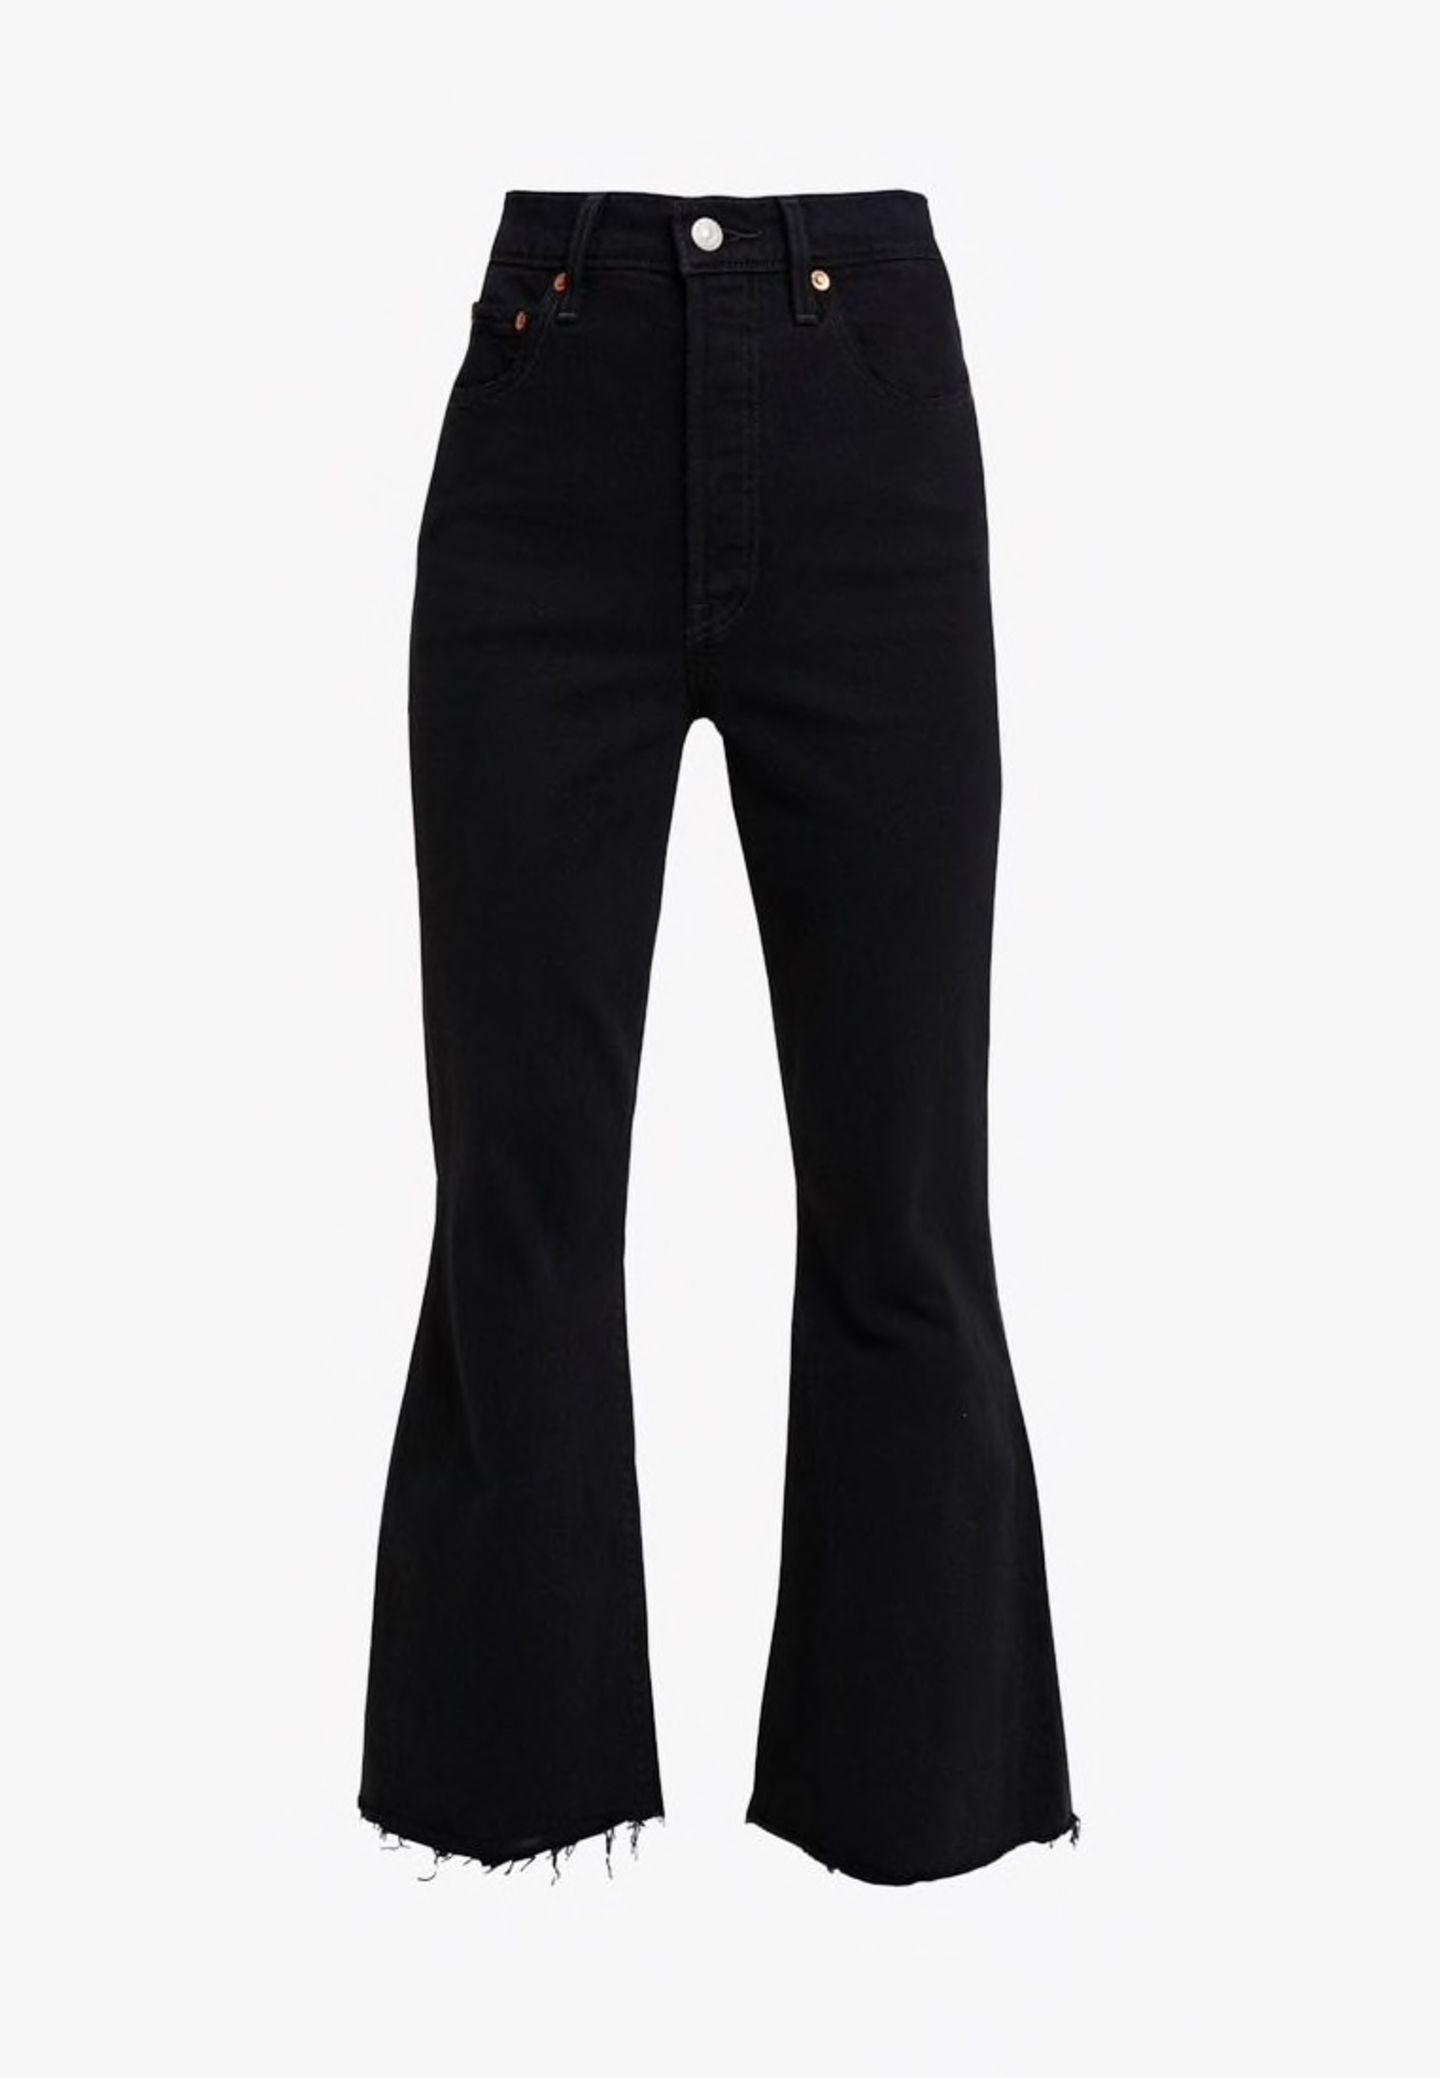 Levi's Ribcage Crop Flare Jeans